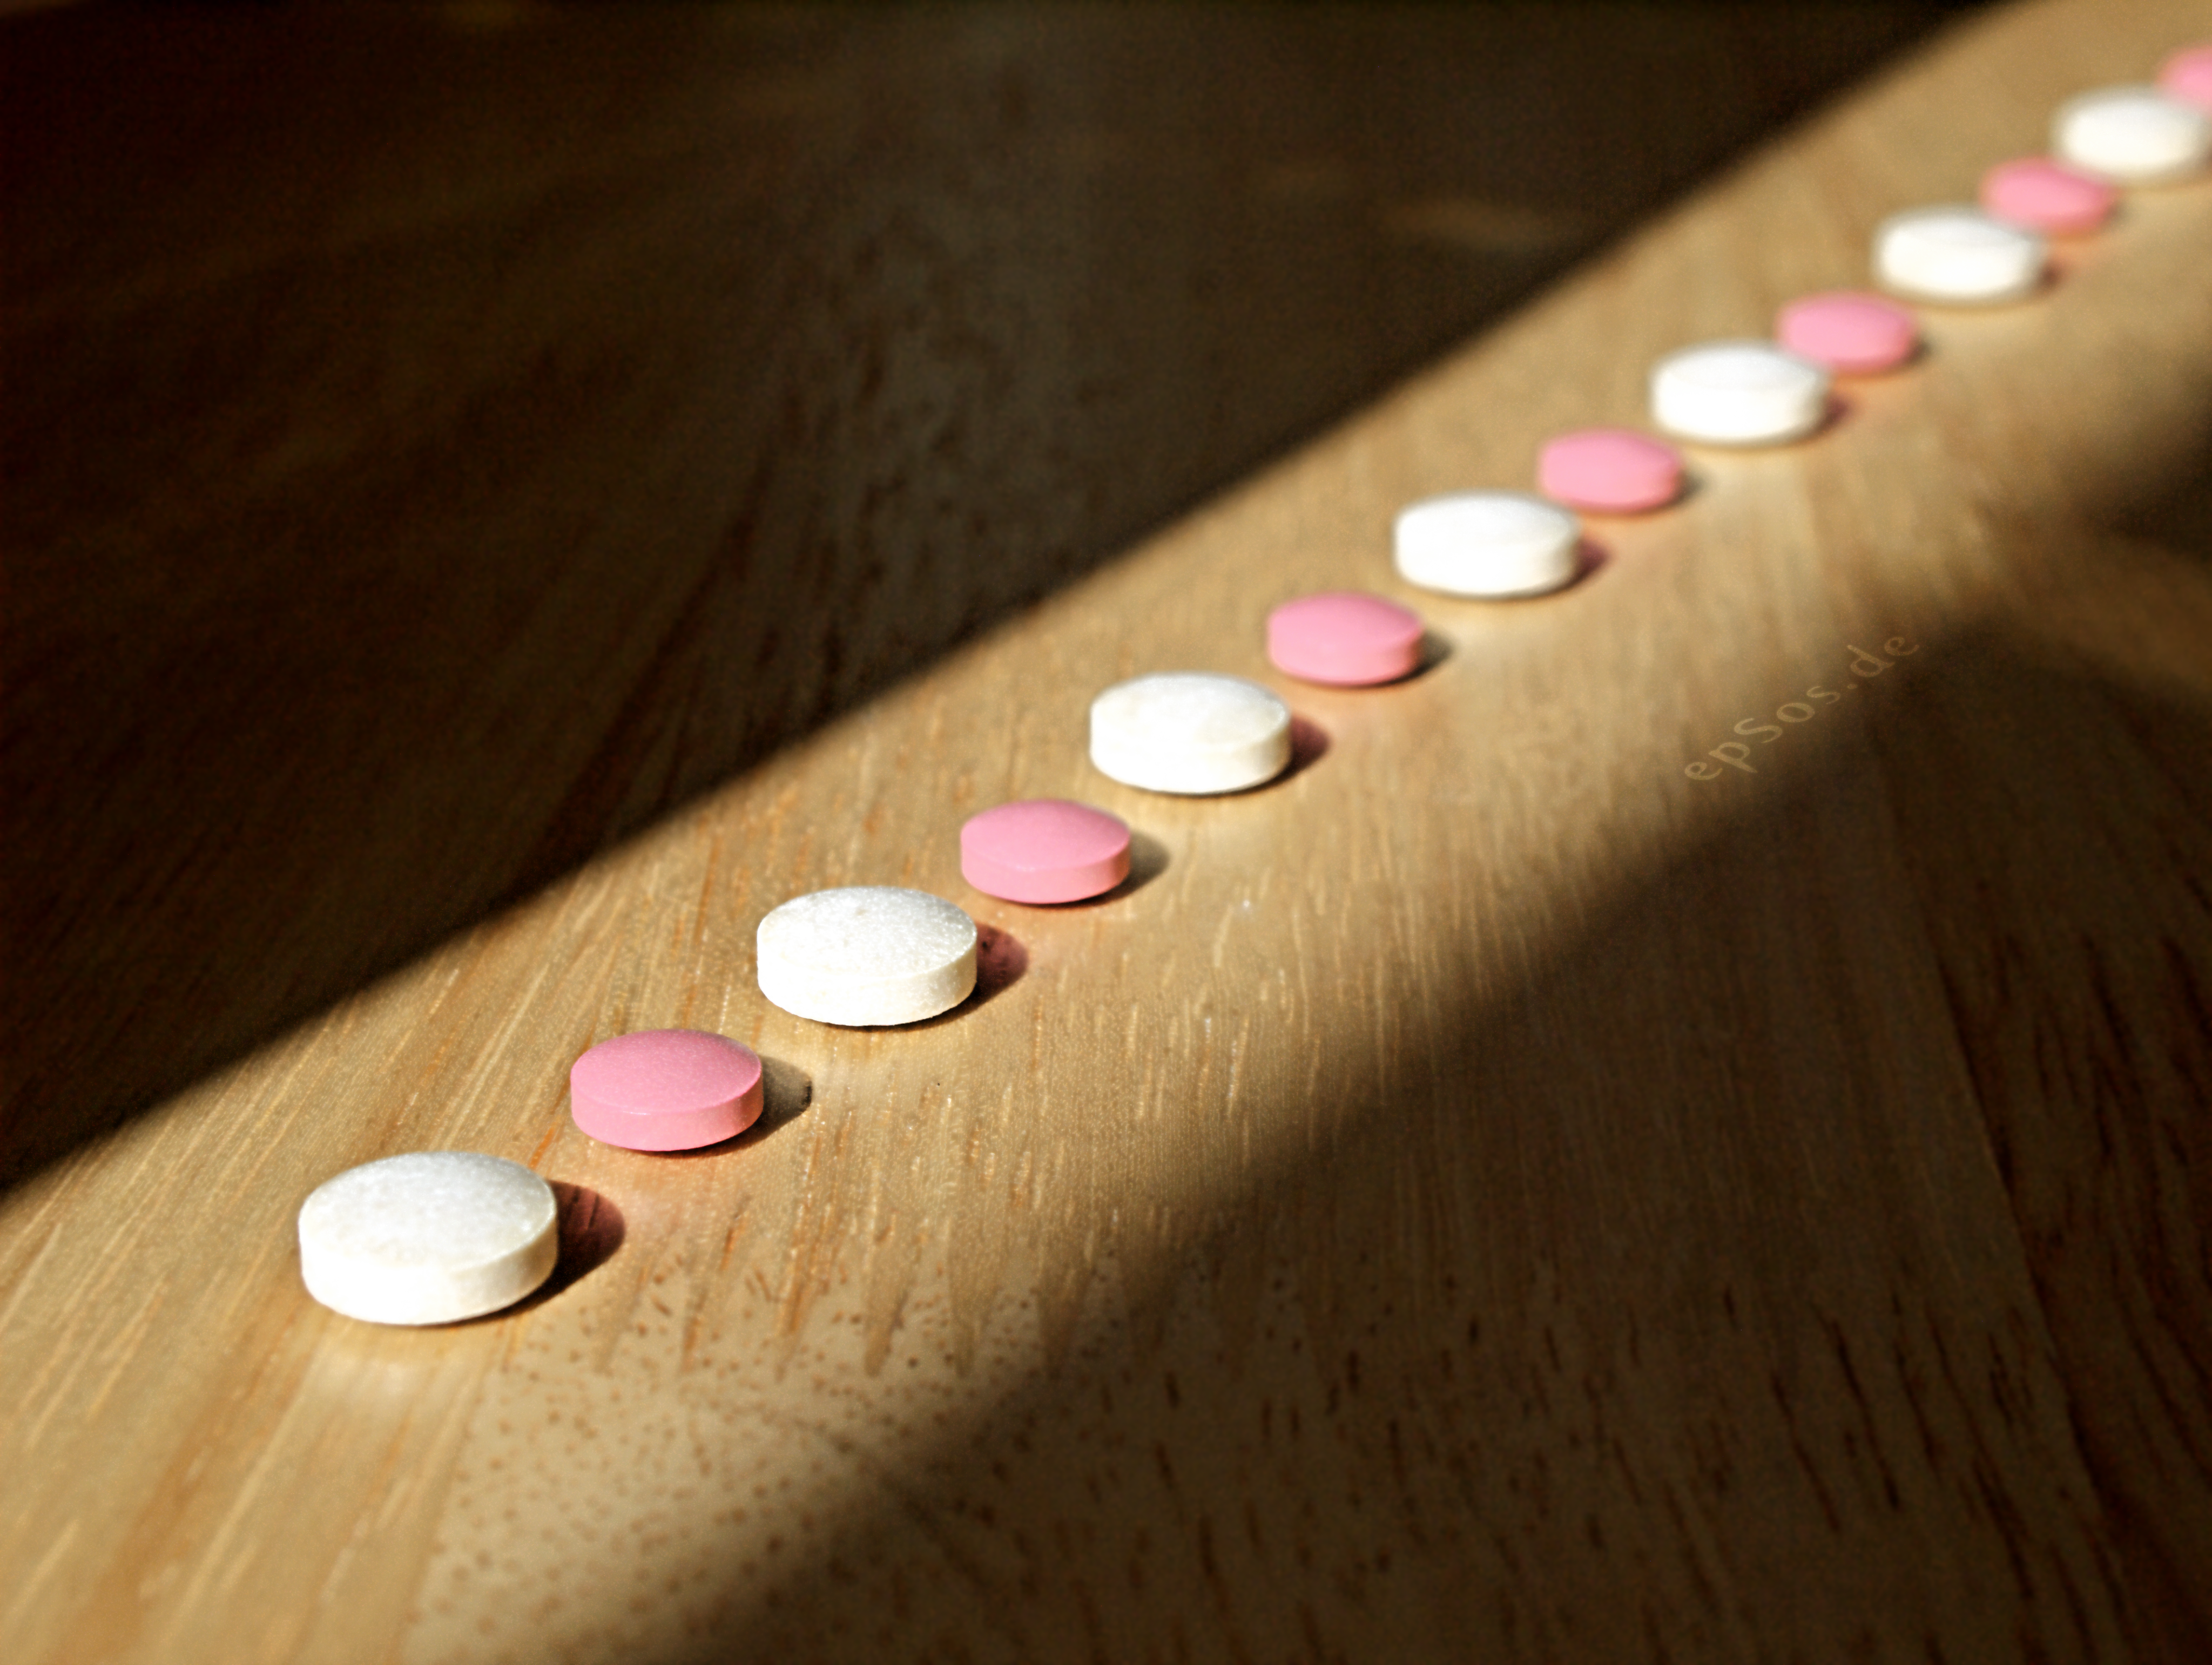 Pink and white pills lined up in a beam of light